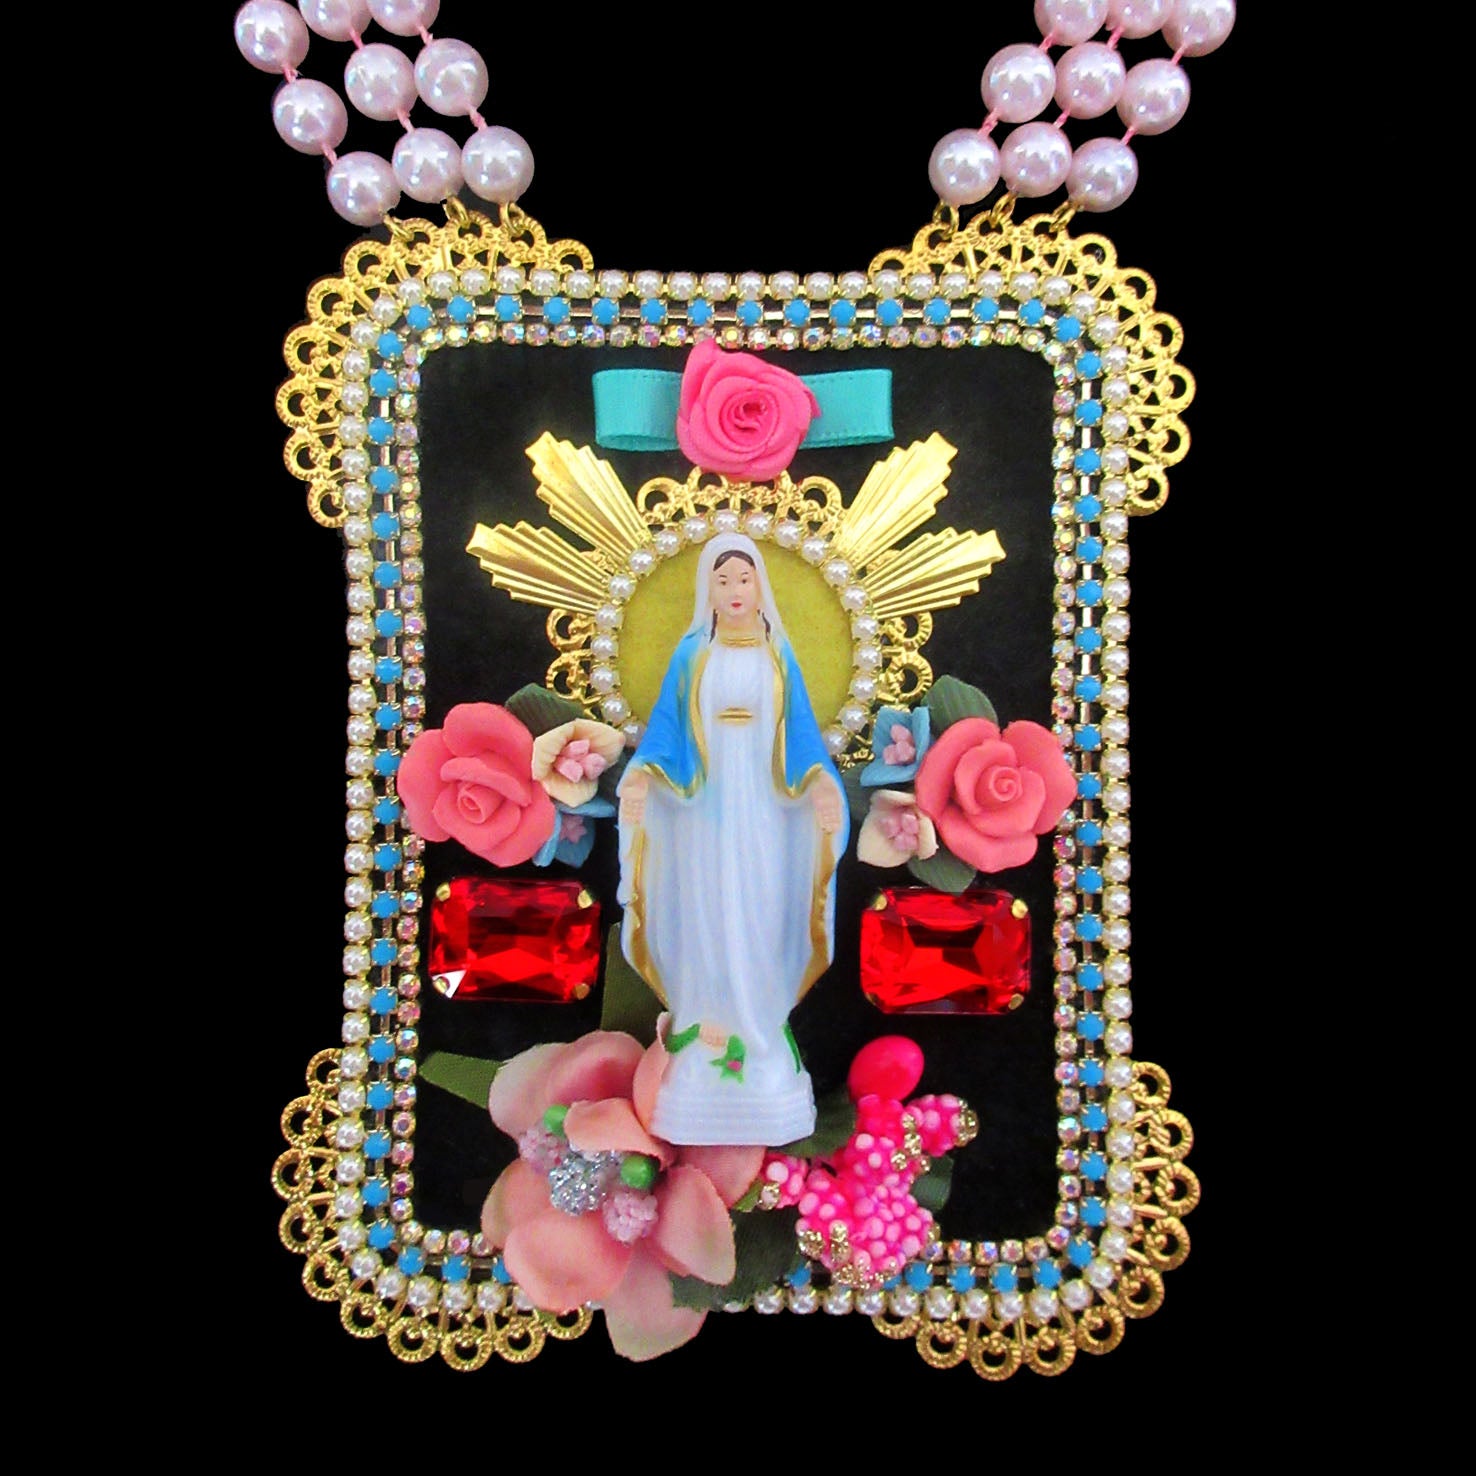 mouchkine jewelry handmade haute couture religious iconic statement madonna necklace.